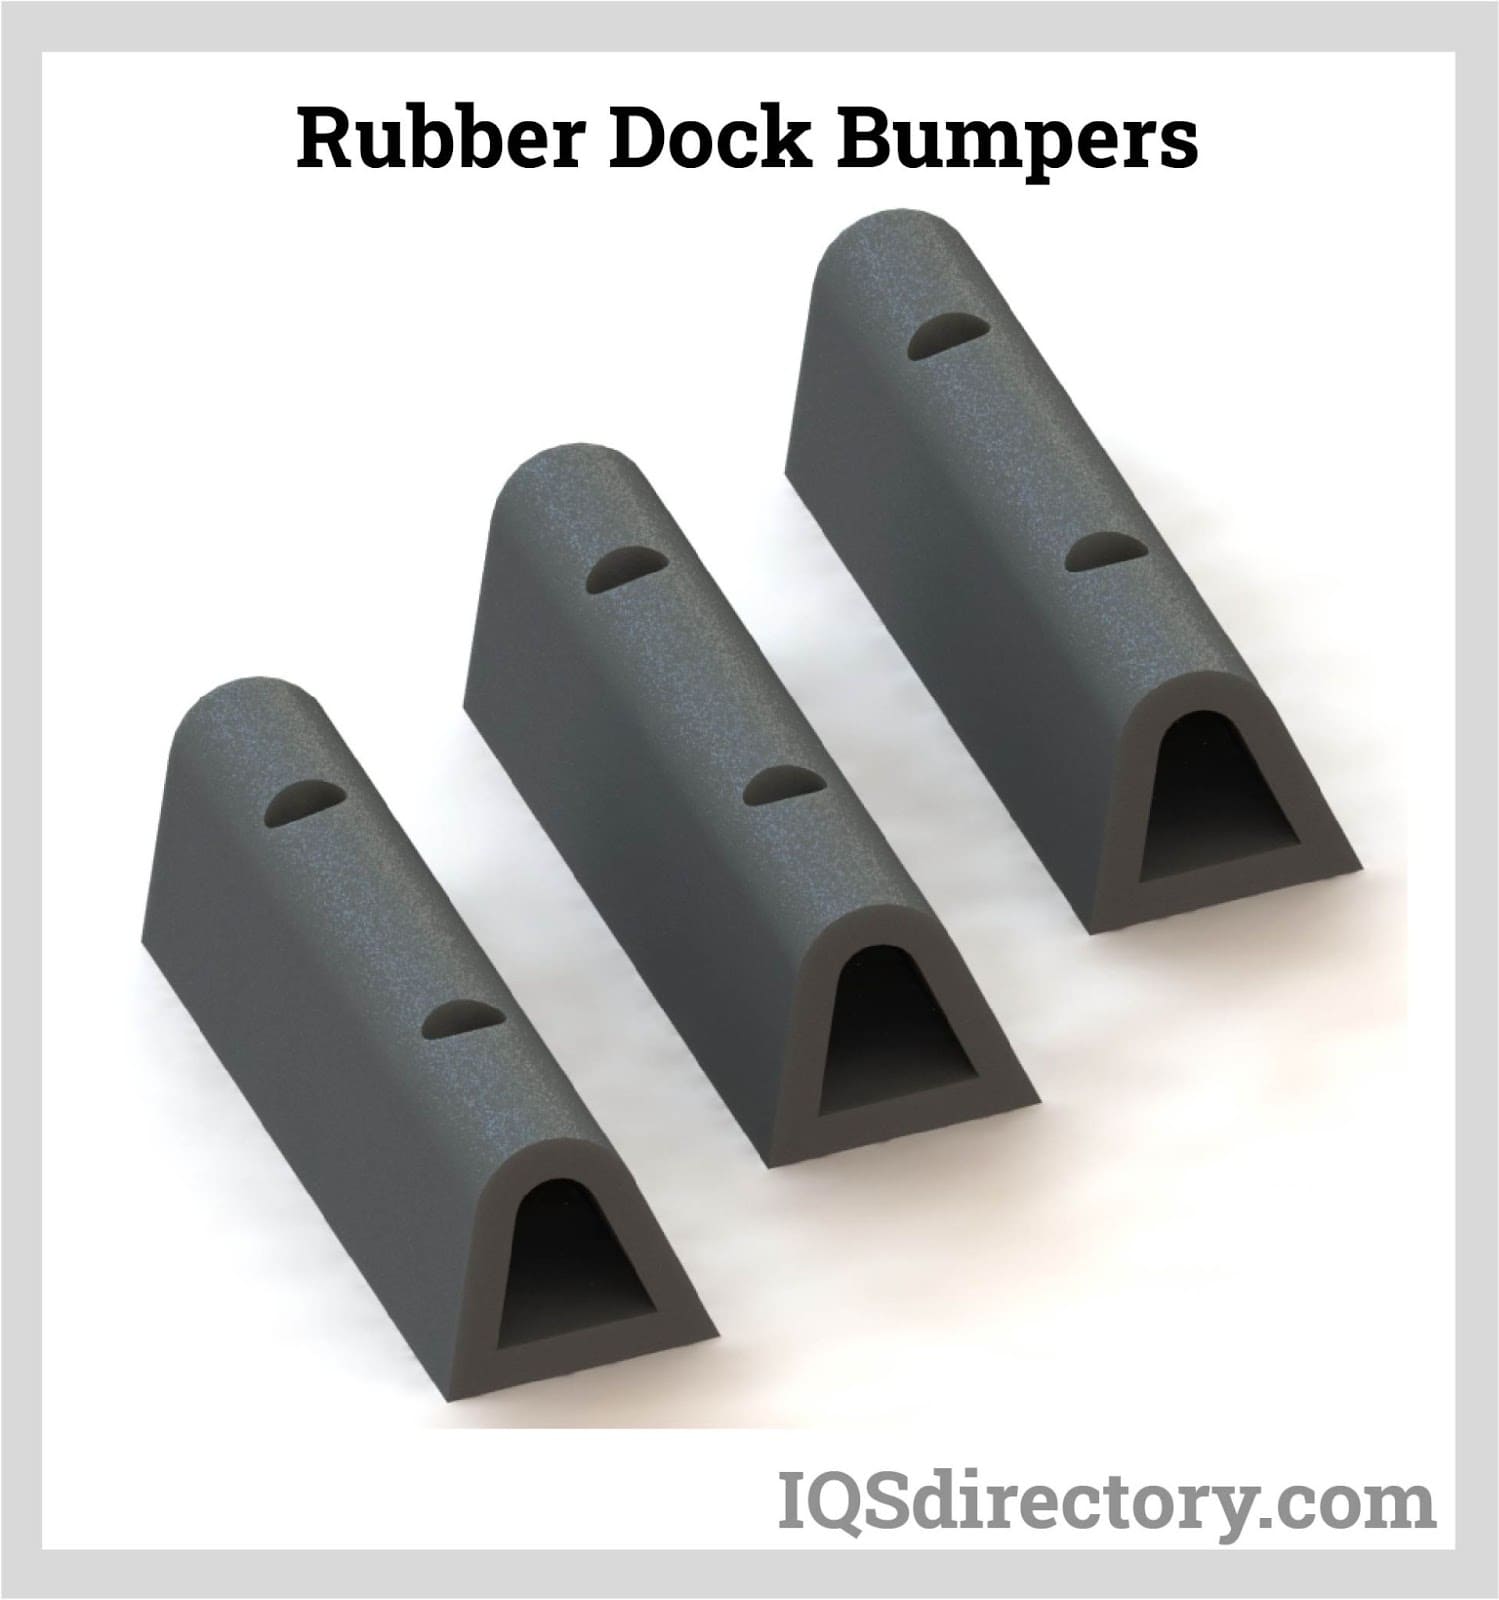 Rubber Dock Bumpers